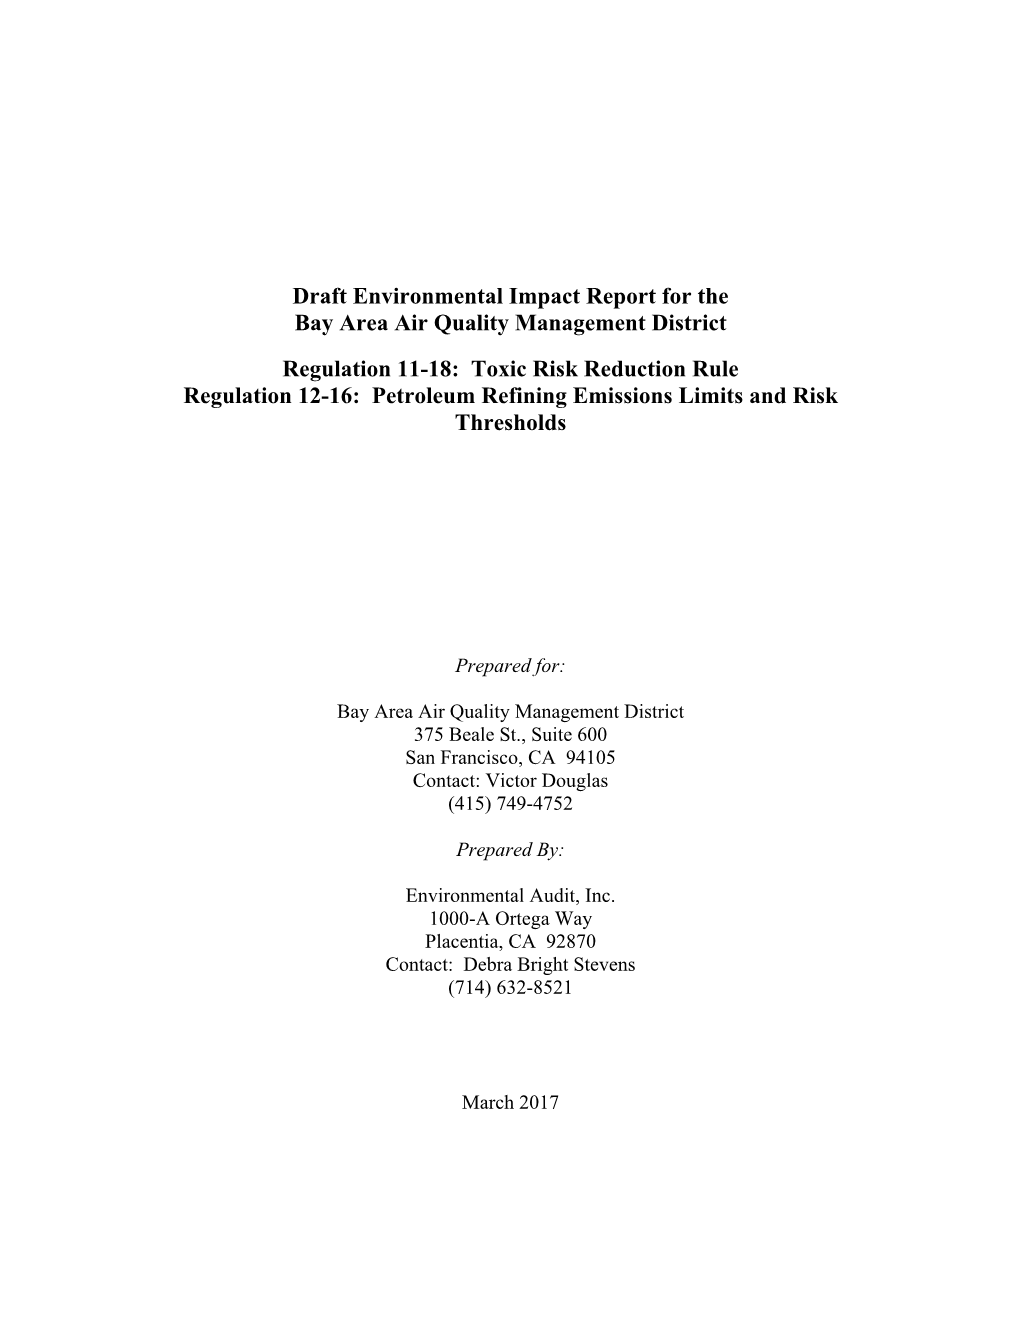 Draft Environmental Impact Report for the Bay Area Air Quality Management District Regulation 11-18: Toxic Risk Reduction Rule